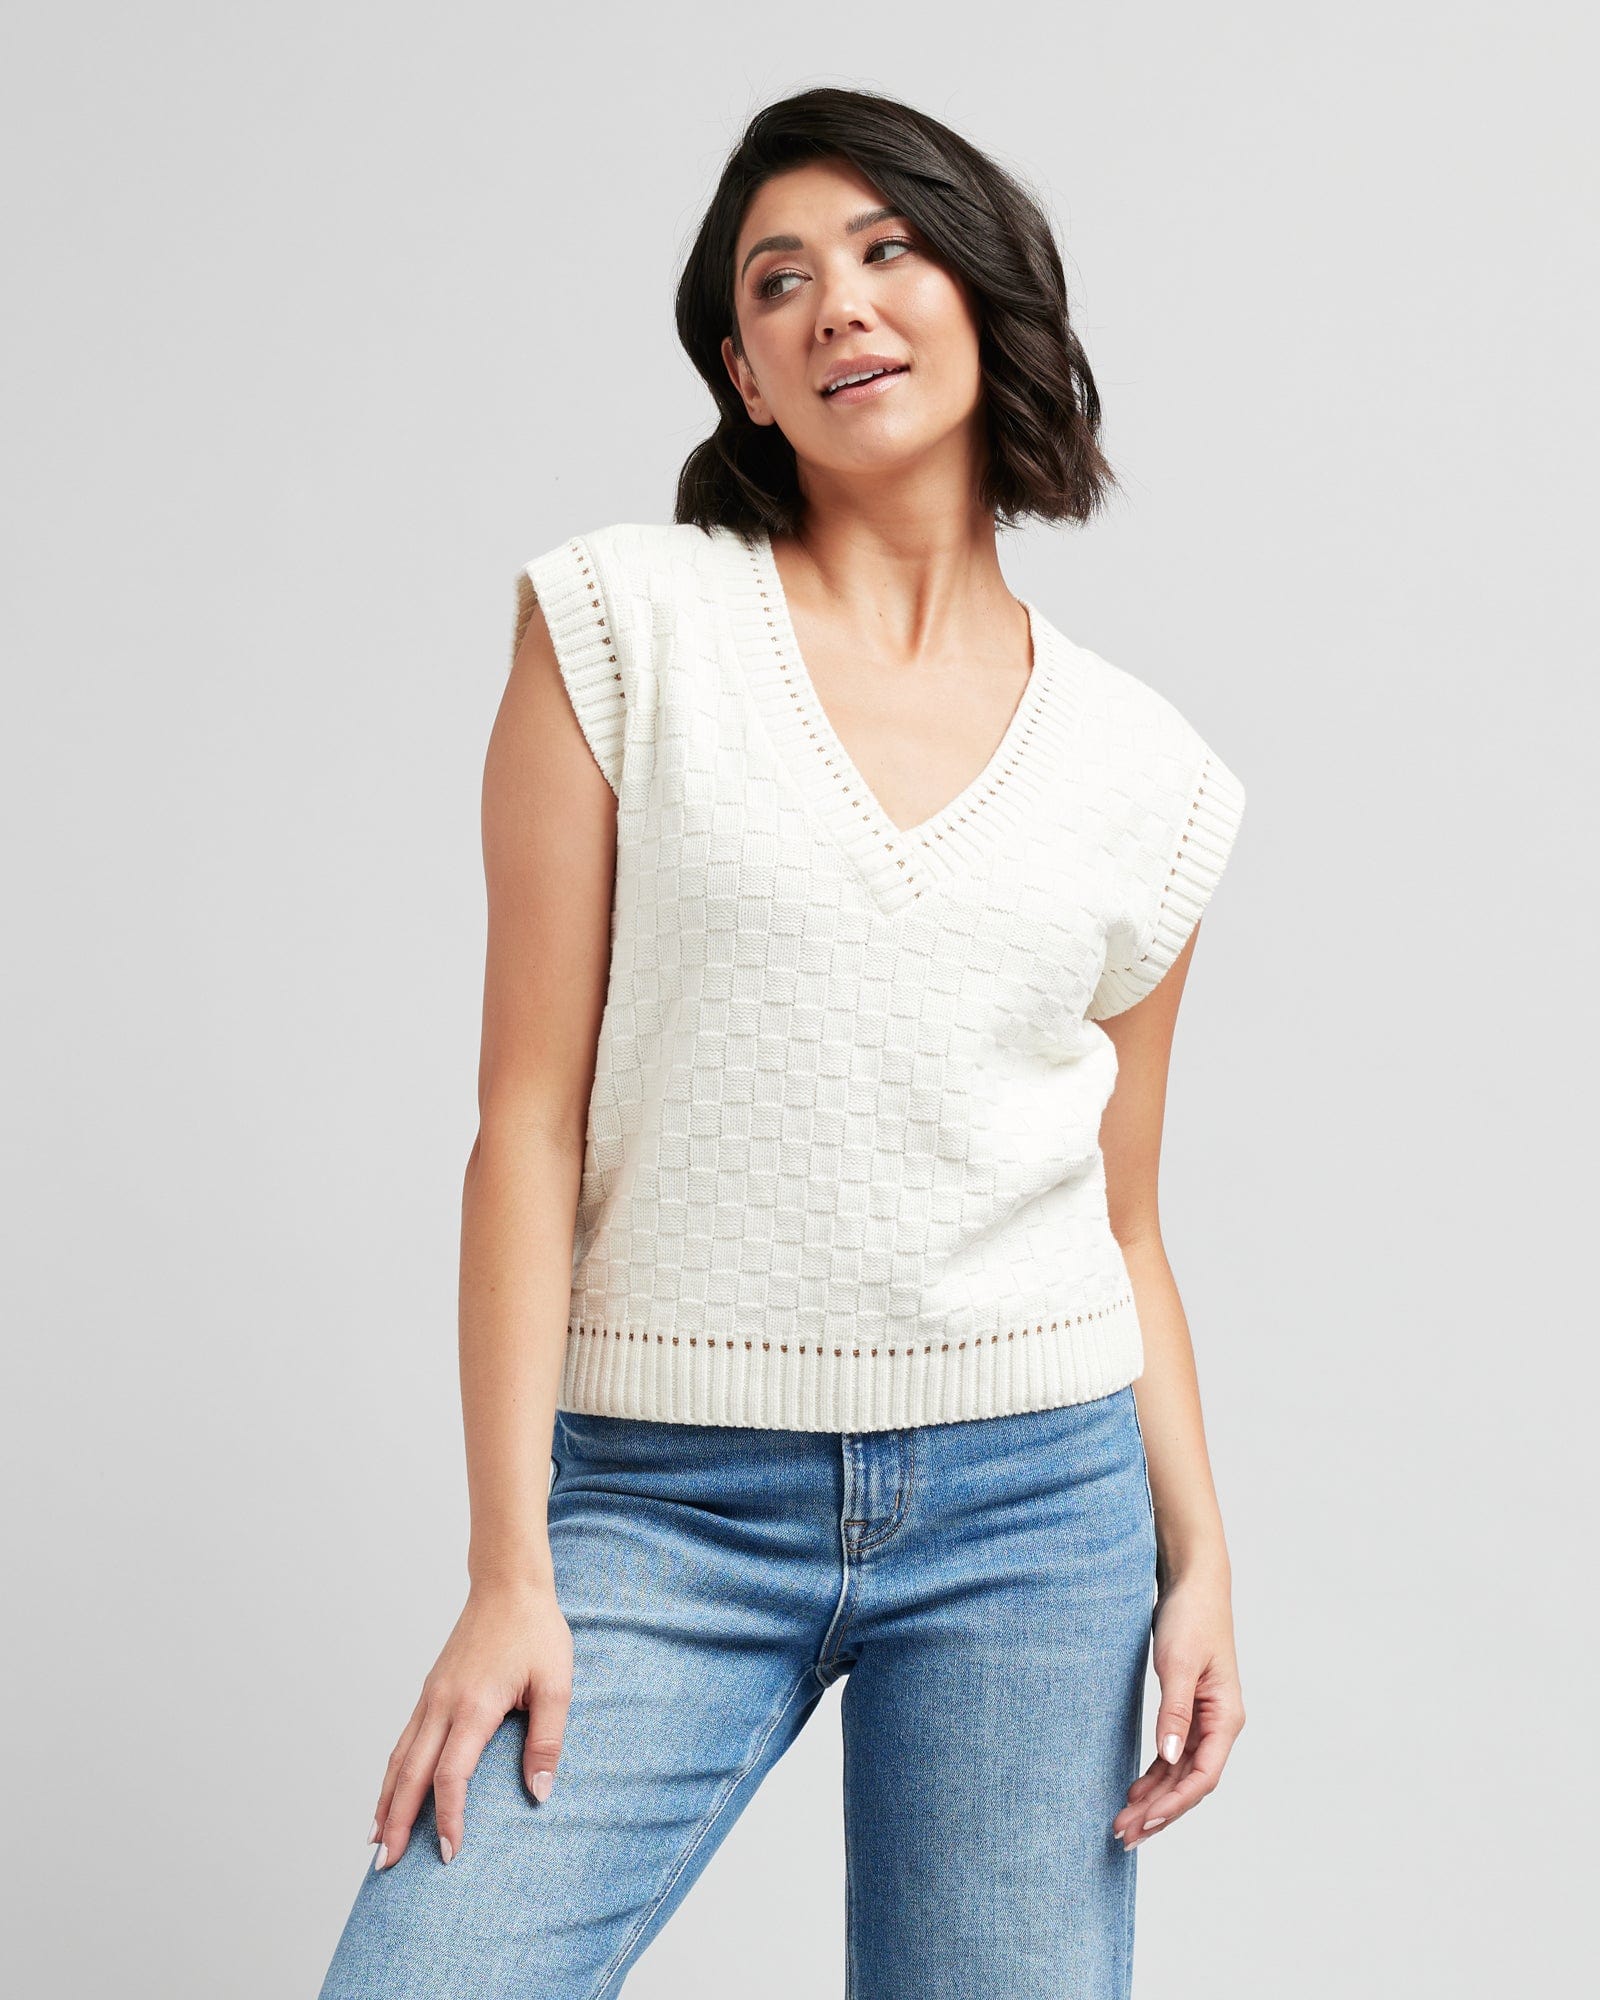 Woman in a textured knit pullover vest